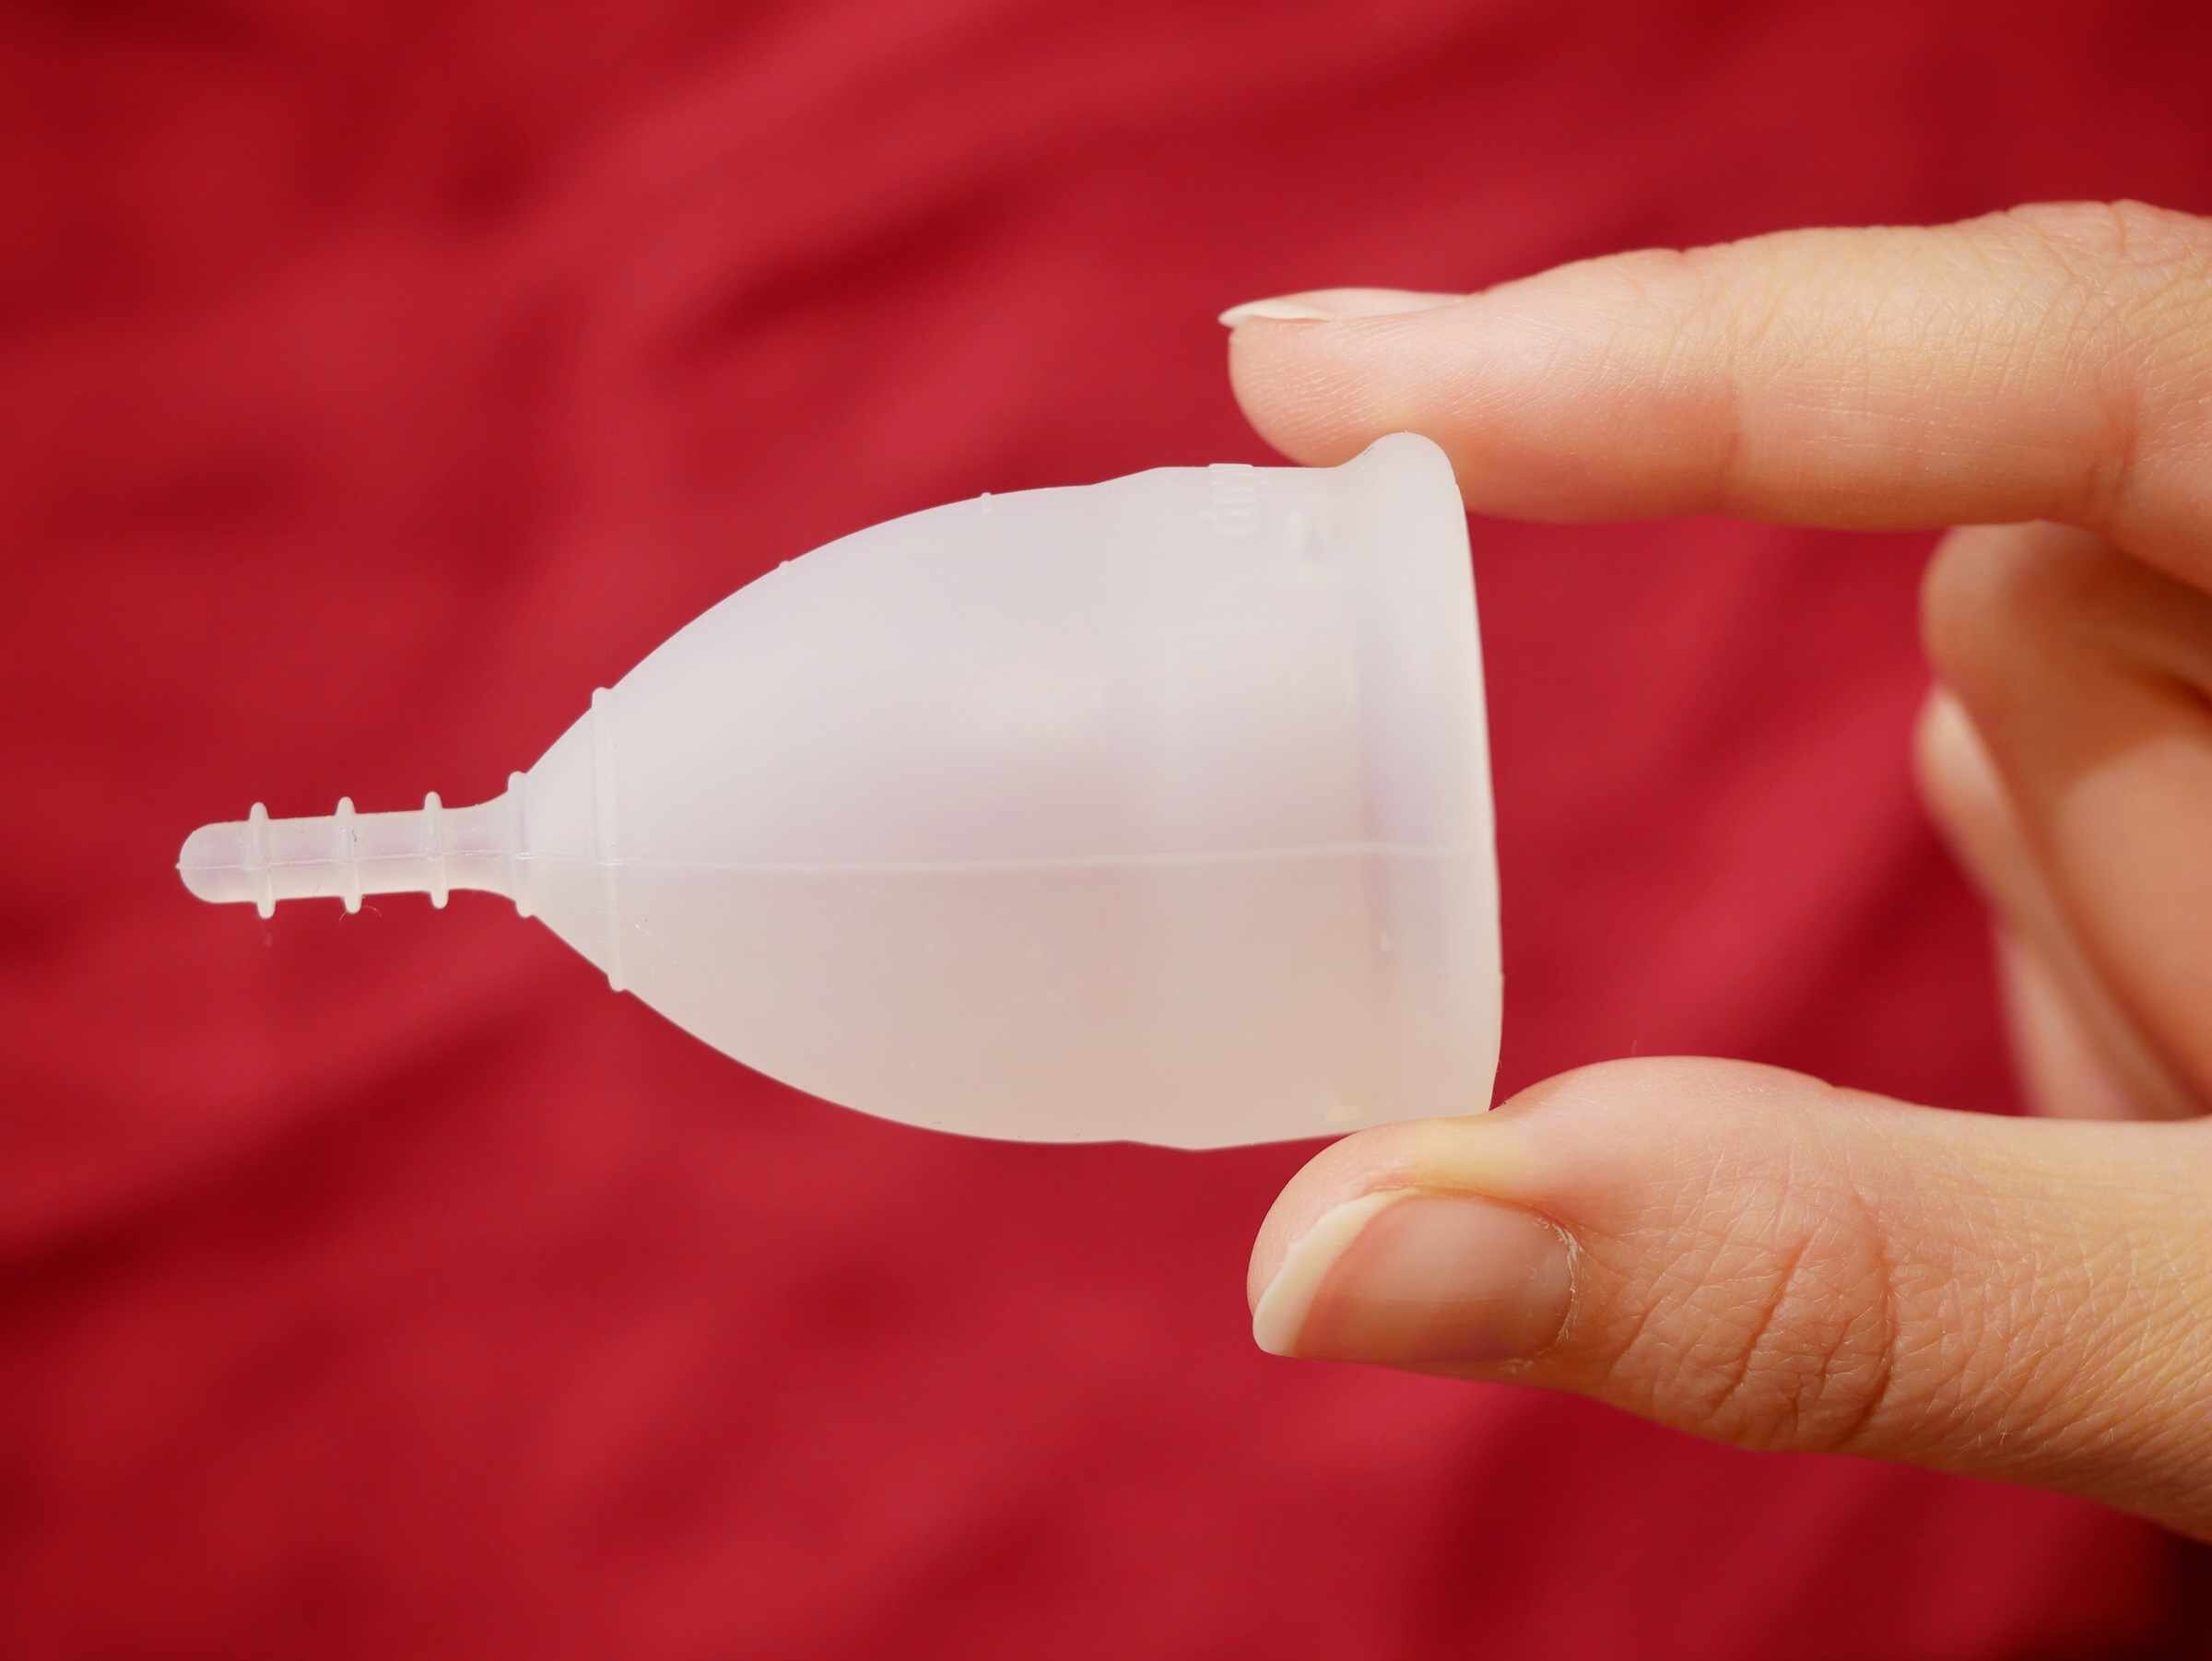 Menstrual cups: Why the recent increase in popularity?